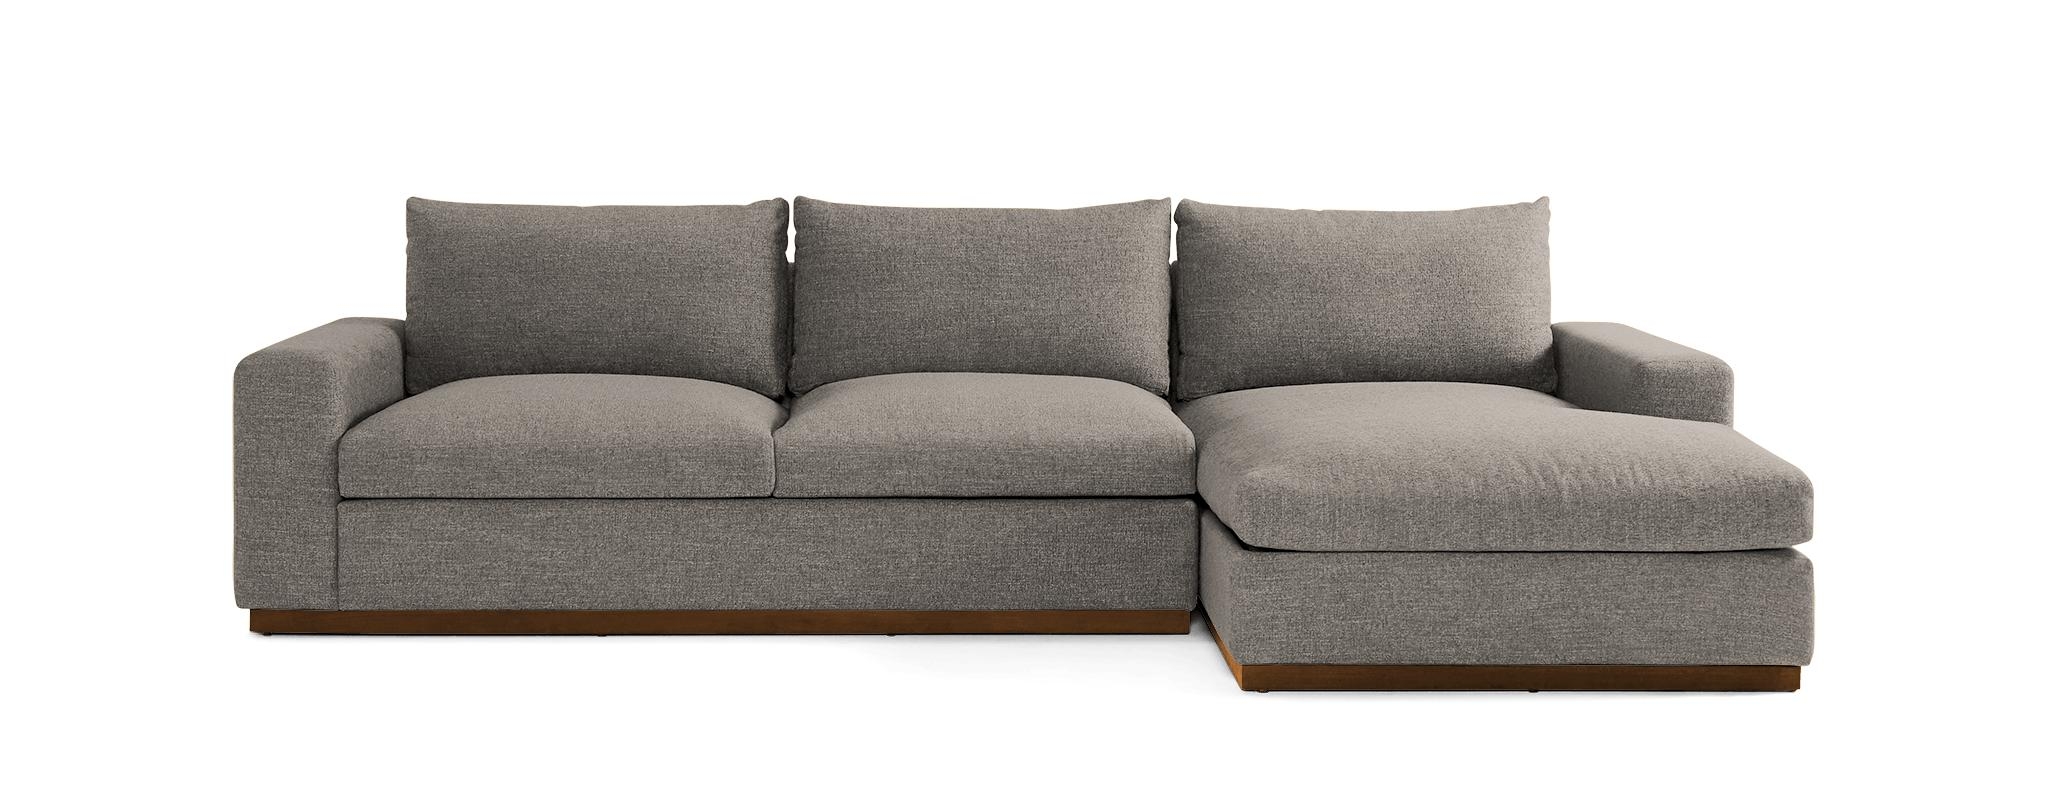 Beige/White Holt Mid Century Modern Sectional with Storage - Prime Stone - Mocha - Right - Image 0